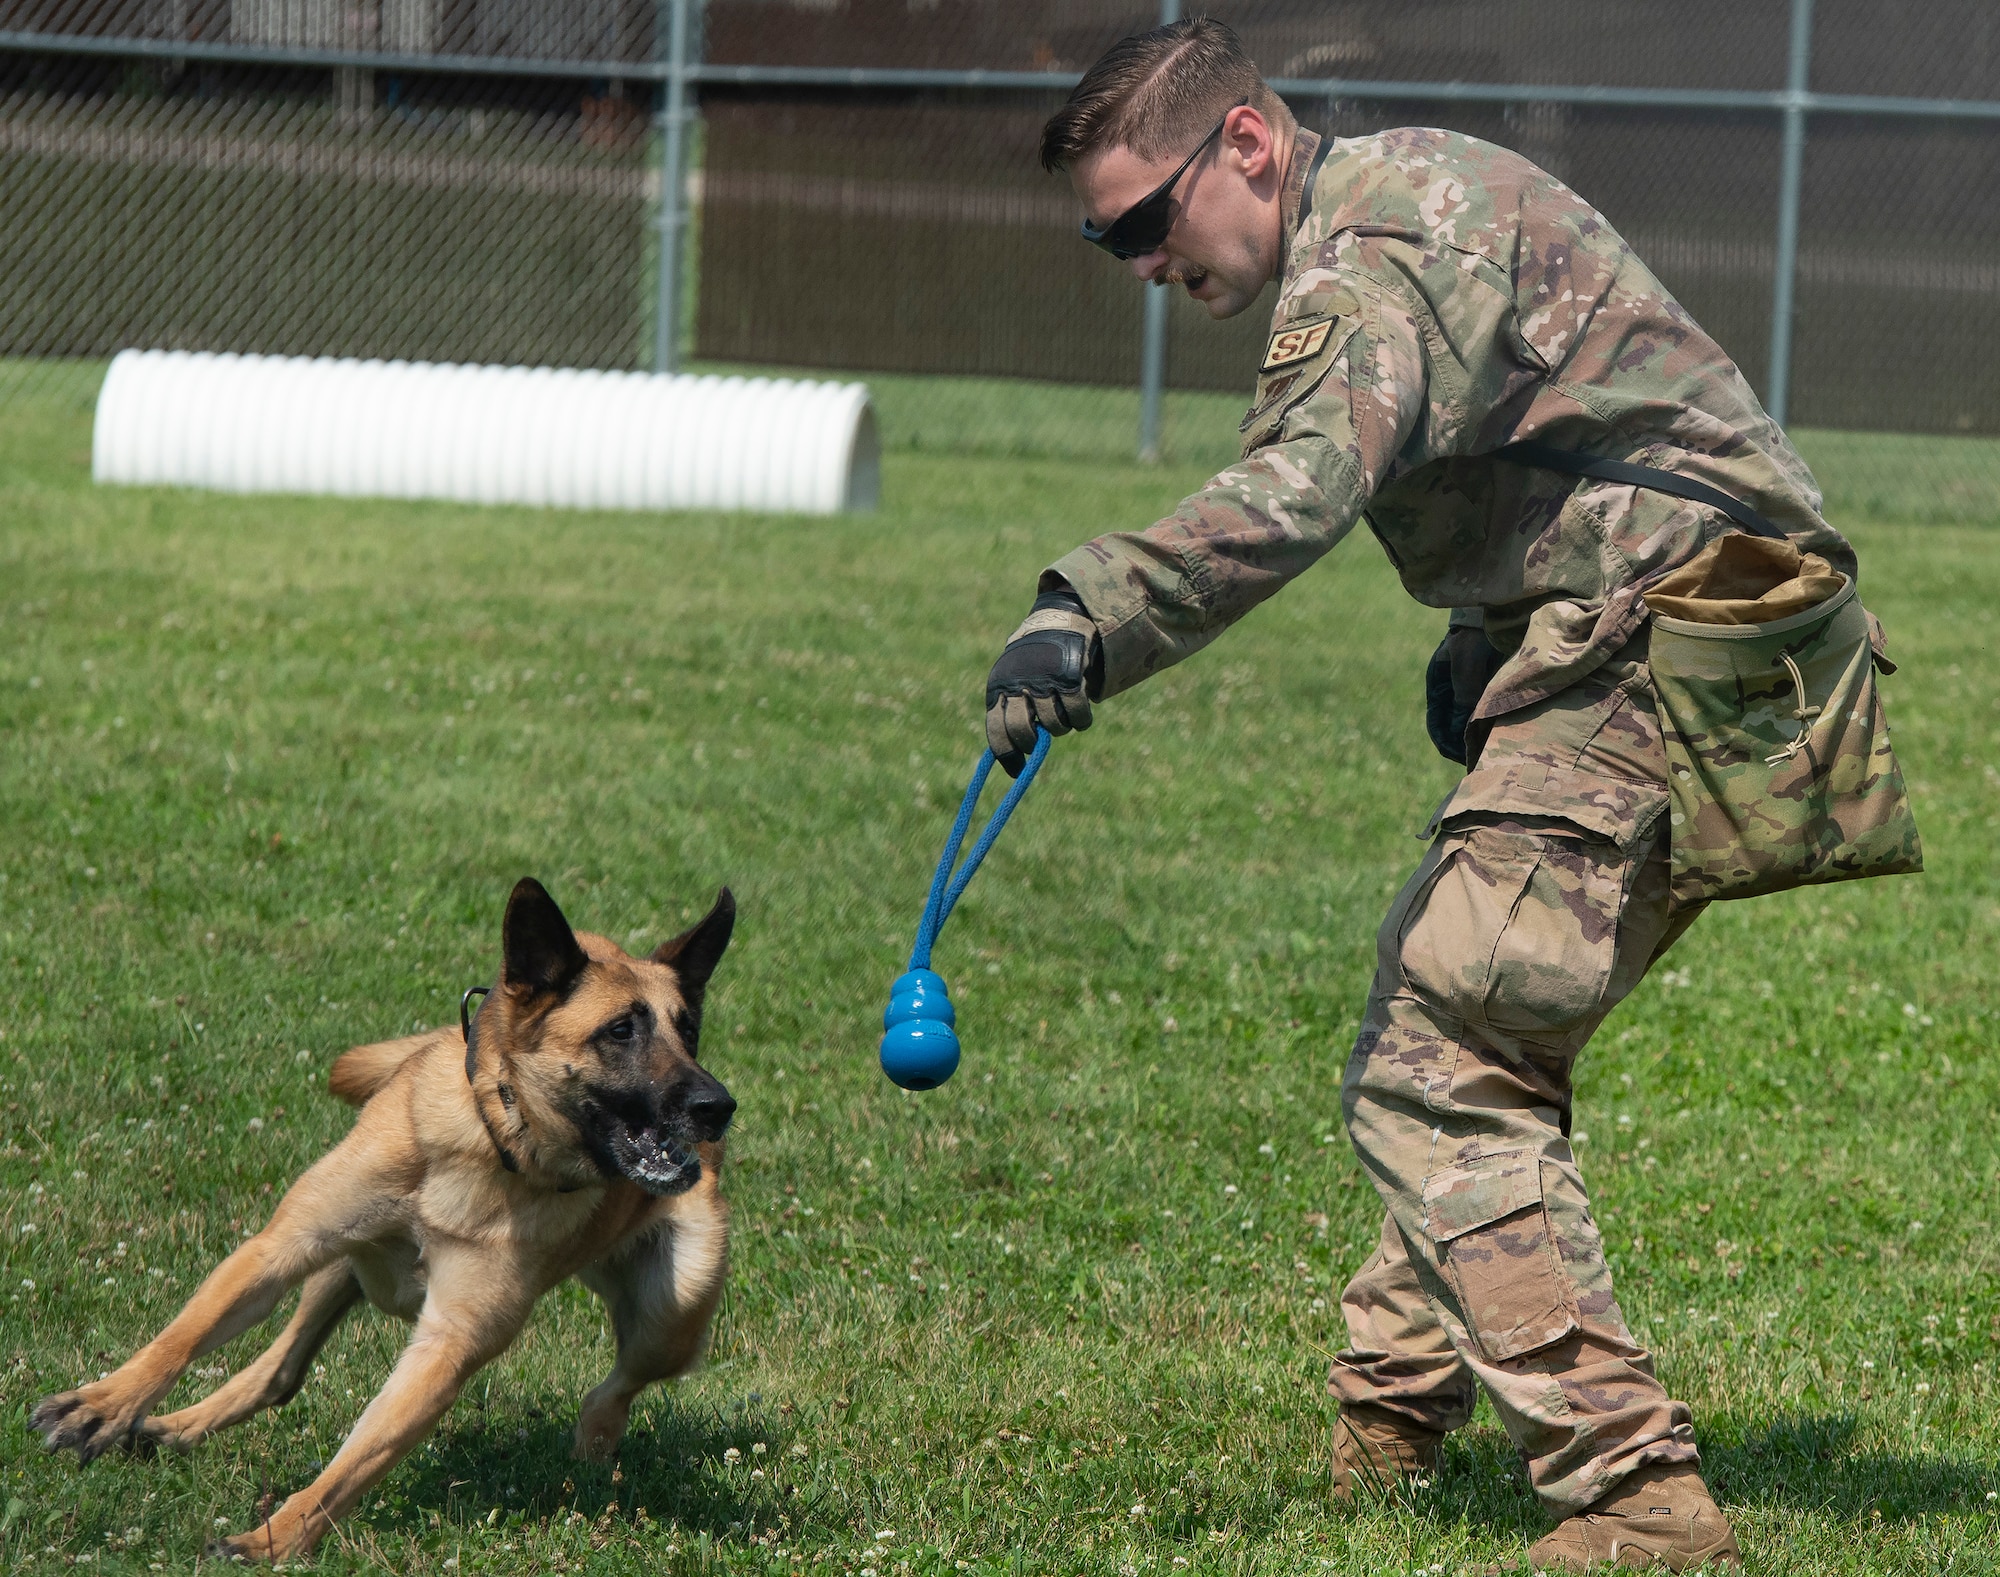 Tech. Sgt. William Sims, 88th Security Forces Squadron military working dog handler, works with Misha on July 14 during a demonstration for Leadership Dayton program members at Wright-Patterson Air Force Base. Sims talked to the group about the kennel’s training techniques and MWD mission. (U.S. Air Force photo by R.J. Oriez)